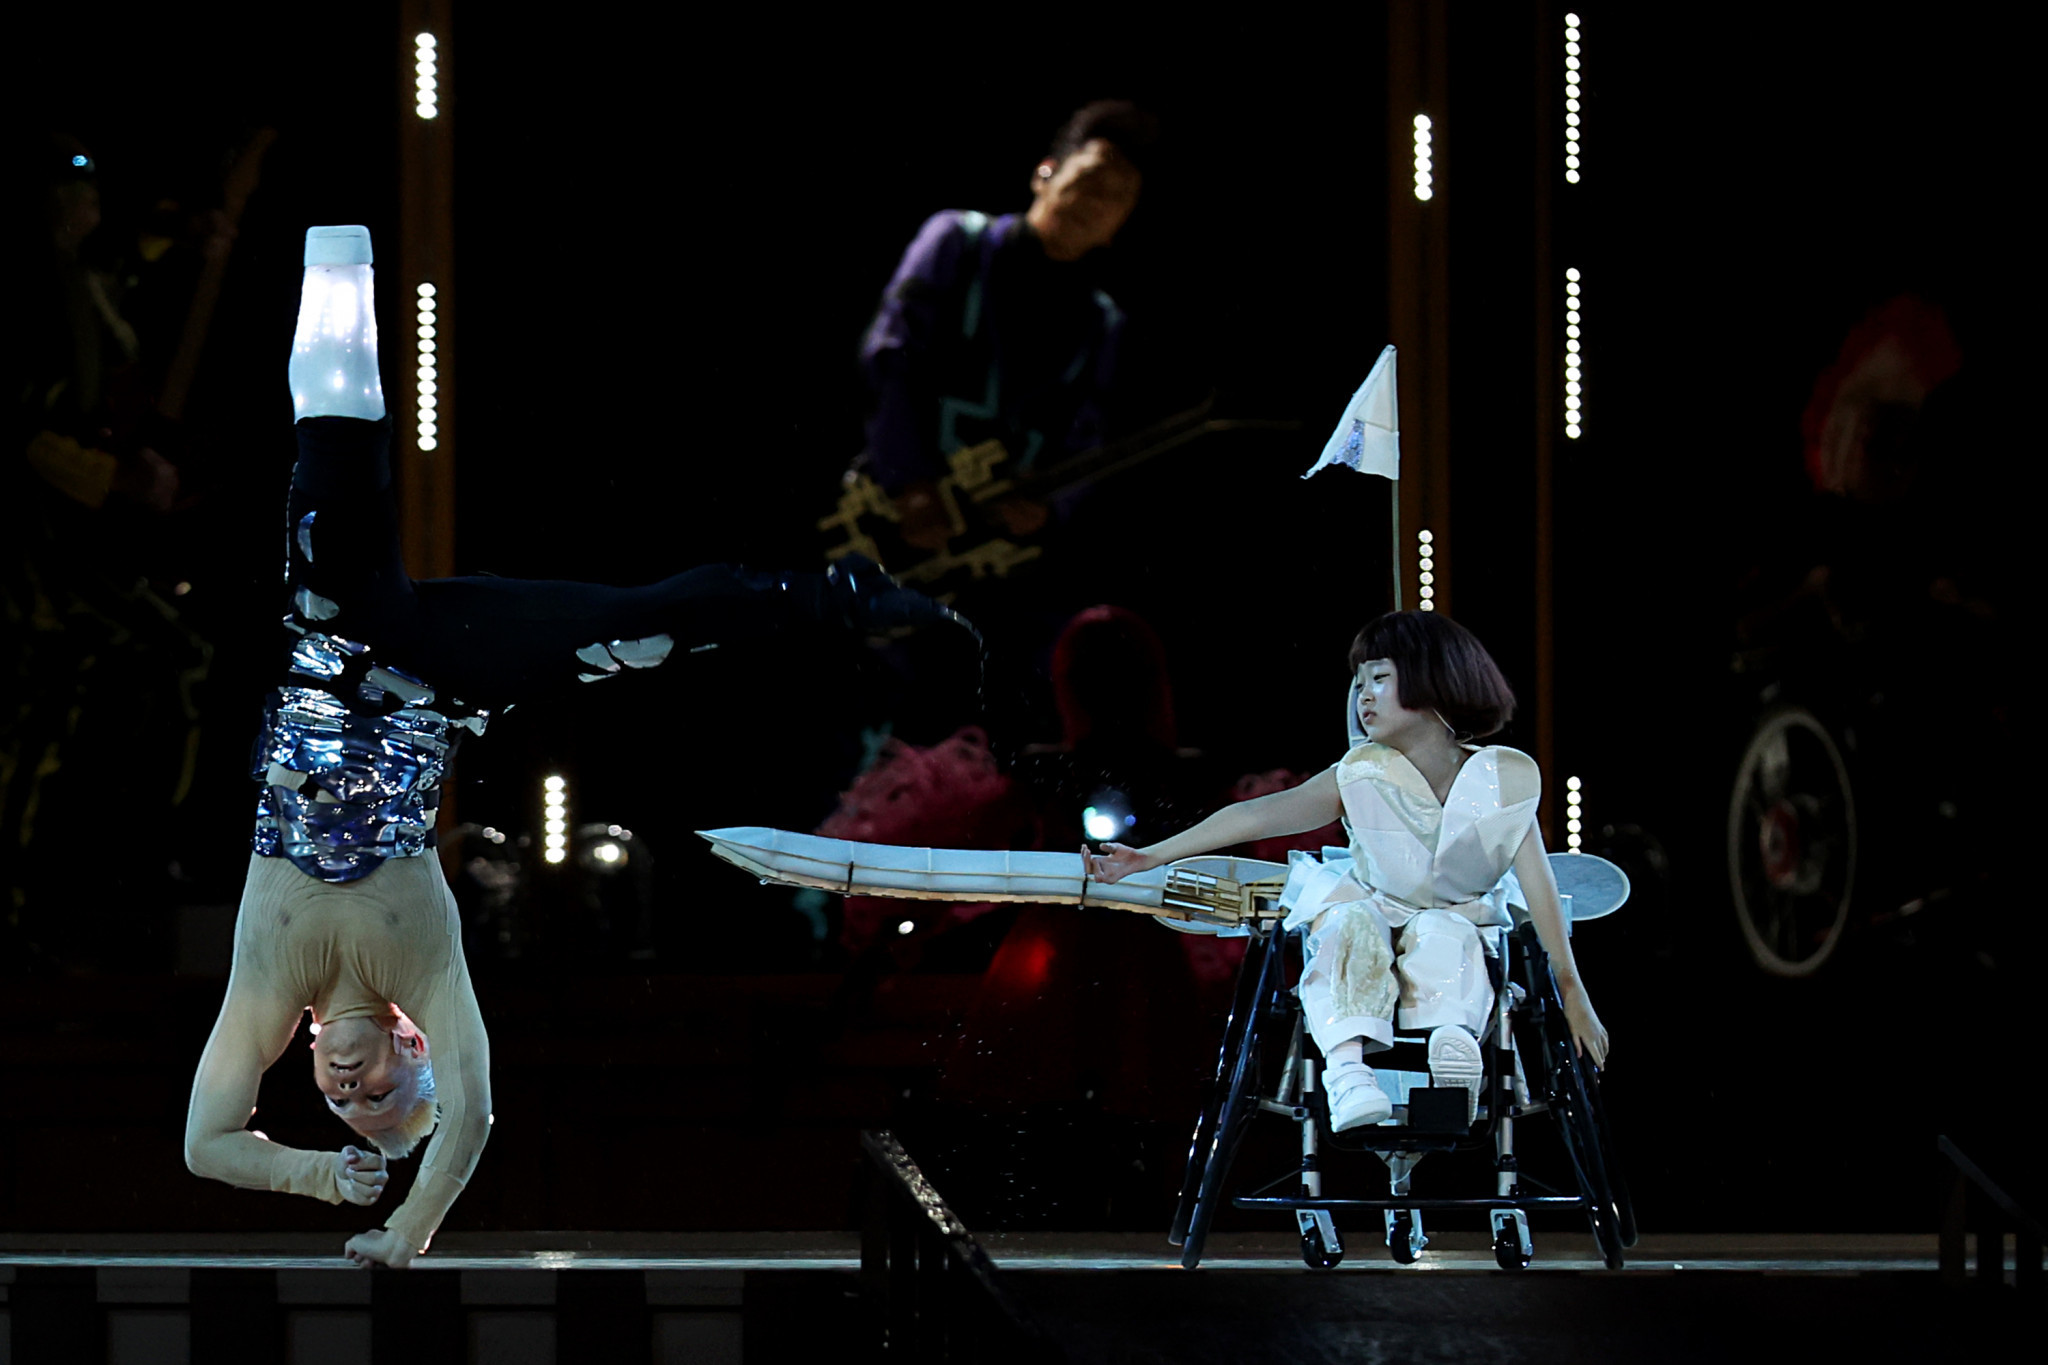 The performance of 13-year-old Wui Yago, as the Little One-Winged Plane, was a highlight of the Tokyo 2020 Paralympics Opening Ceremony ©Getty Images